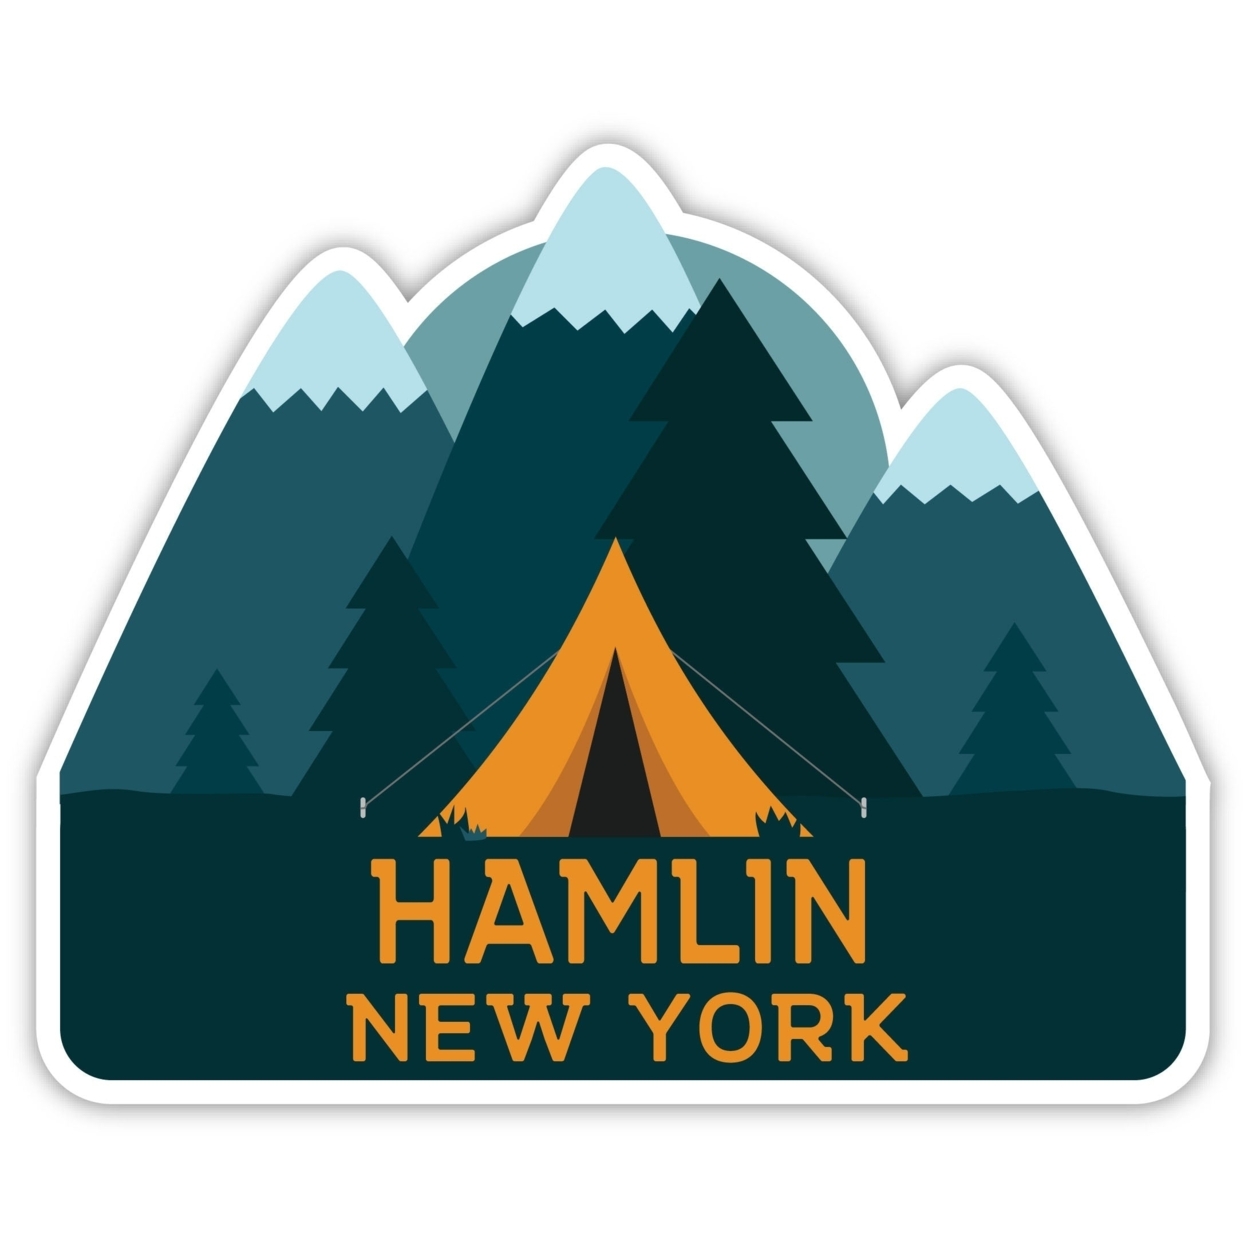 Hamlin New York Souvenir Decorative Stickers (Choose Theme And Size) - 4-Pack, 2-Inch, Tent